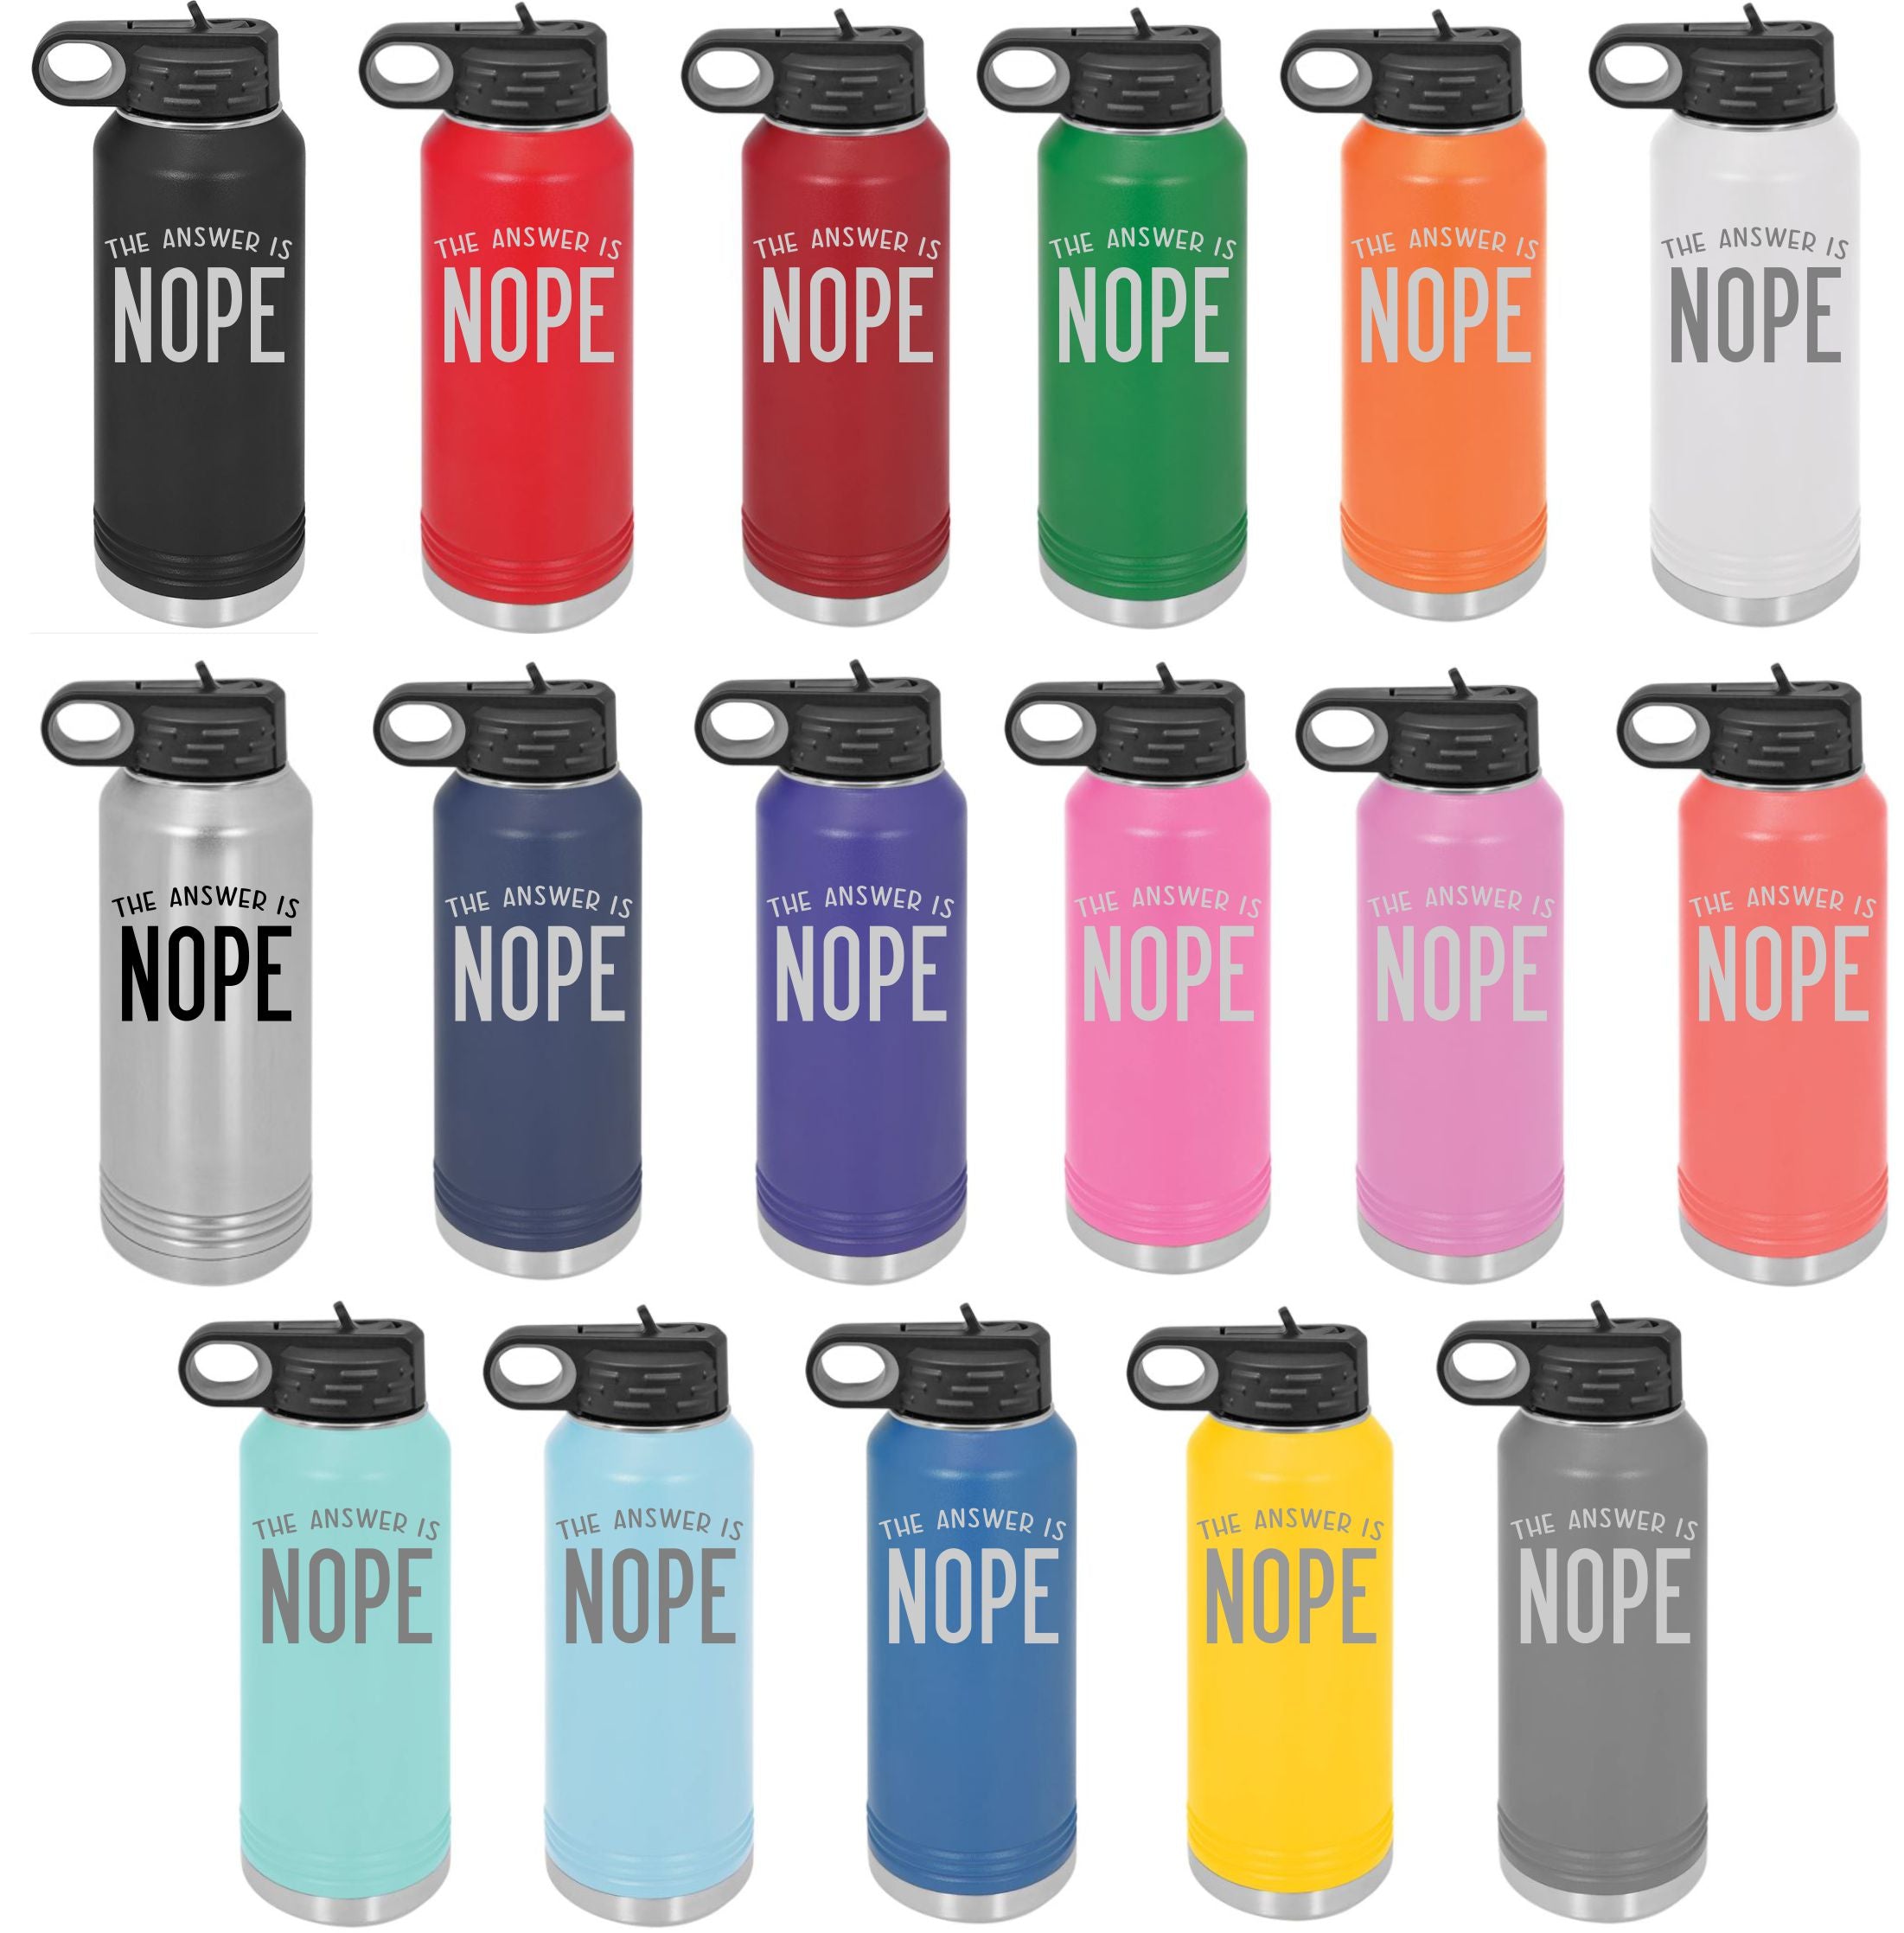 The Answer is NOPE Engraved 30oz. Water Bottle - Powercall Sirens LLC